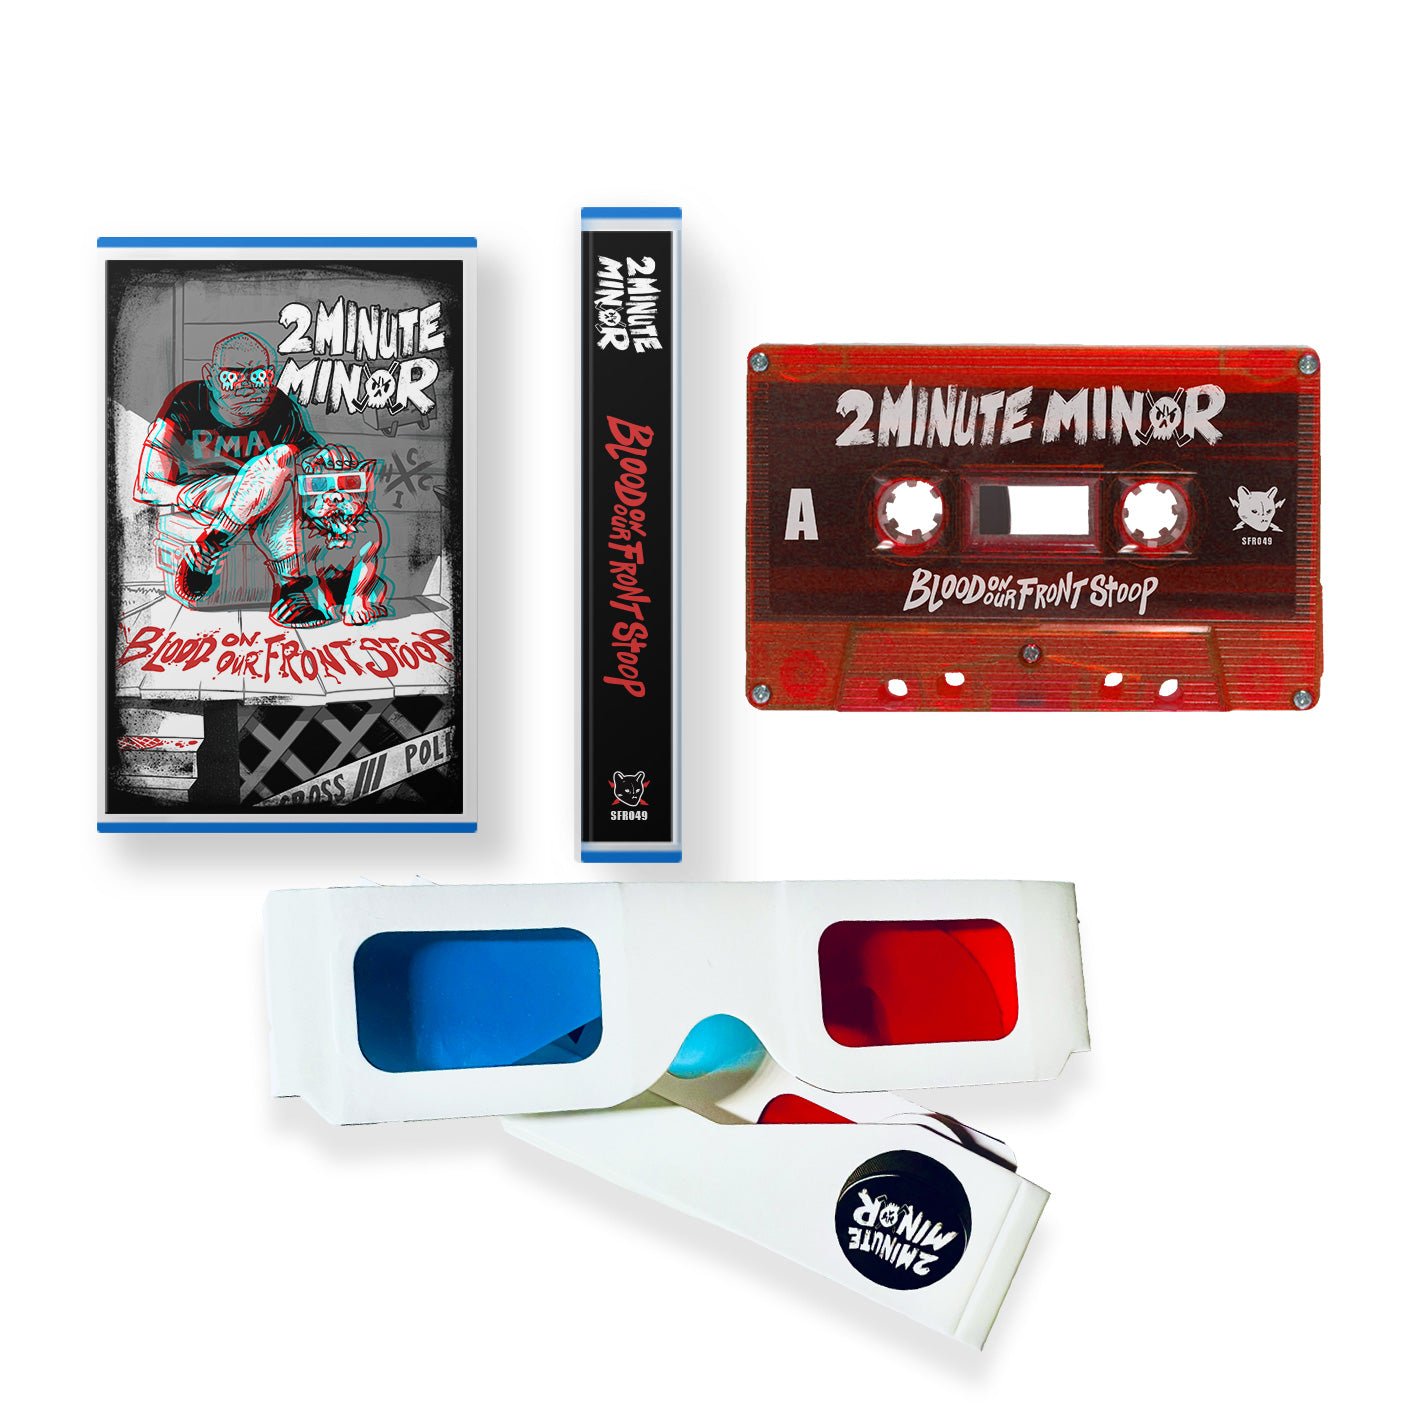 2Minute Minor: Blood On Our Front Stoop: 3D Cassette - Steadfast Records